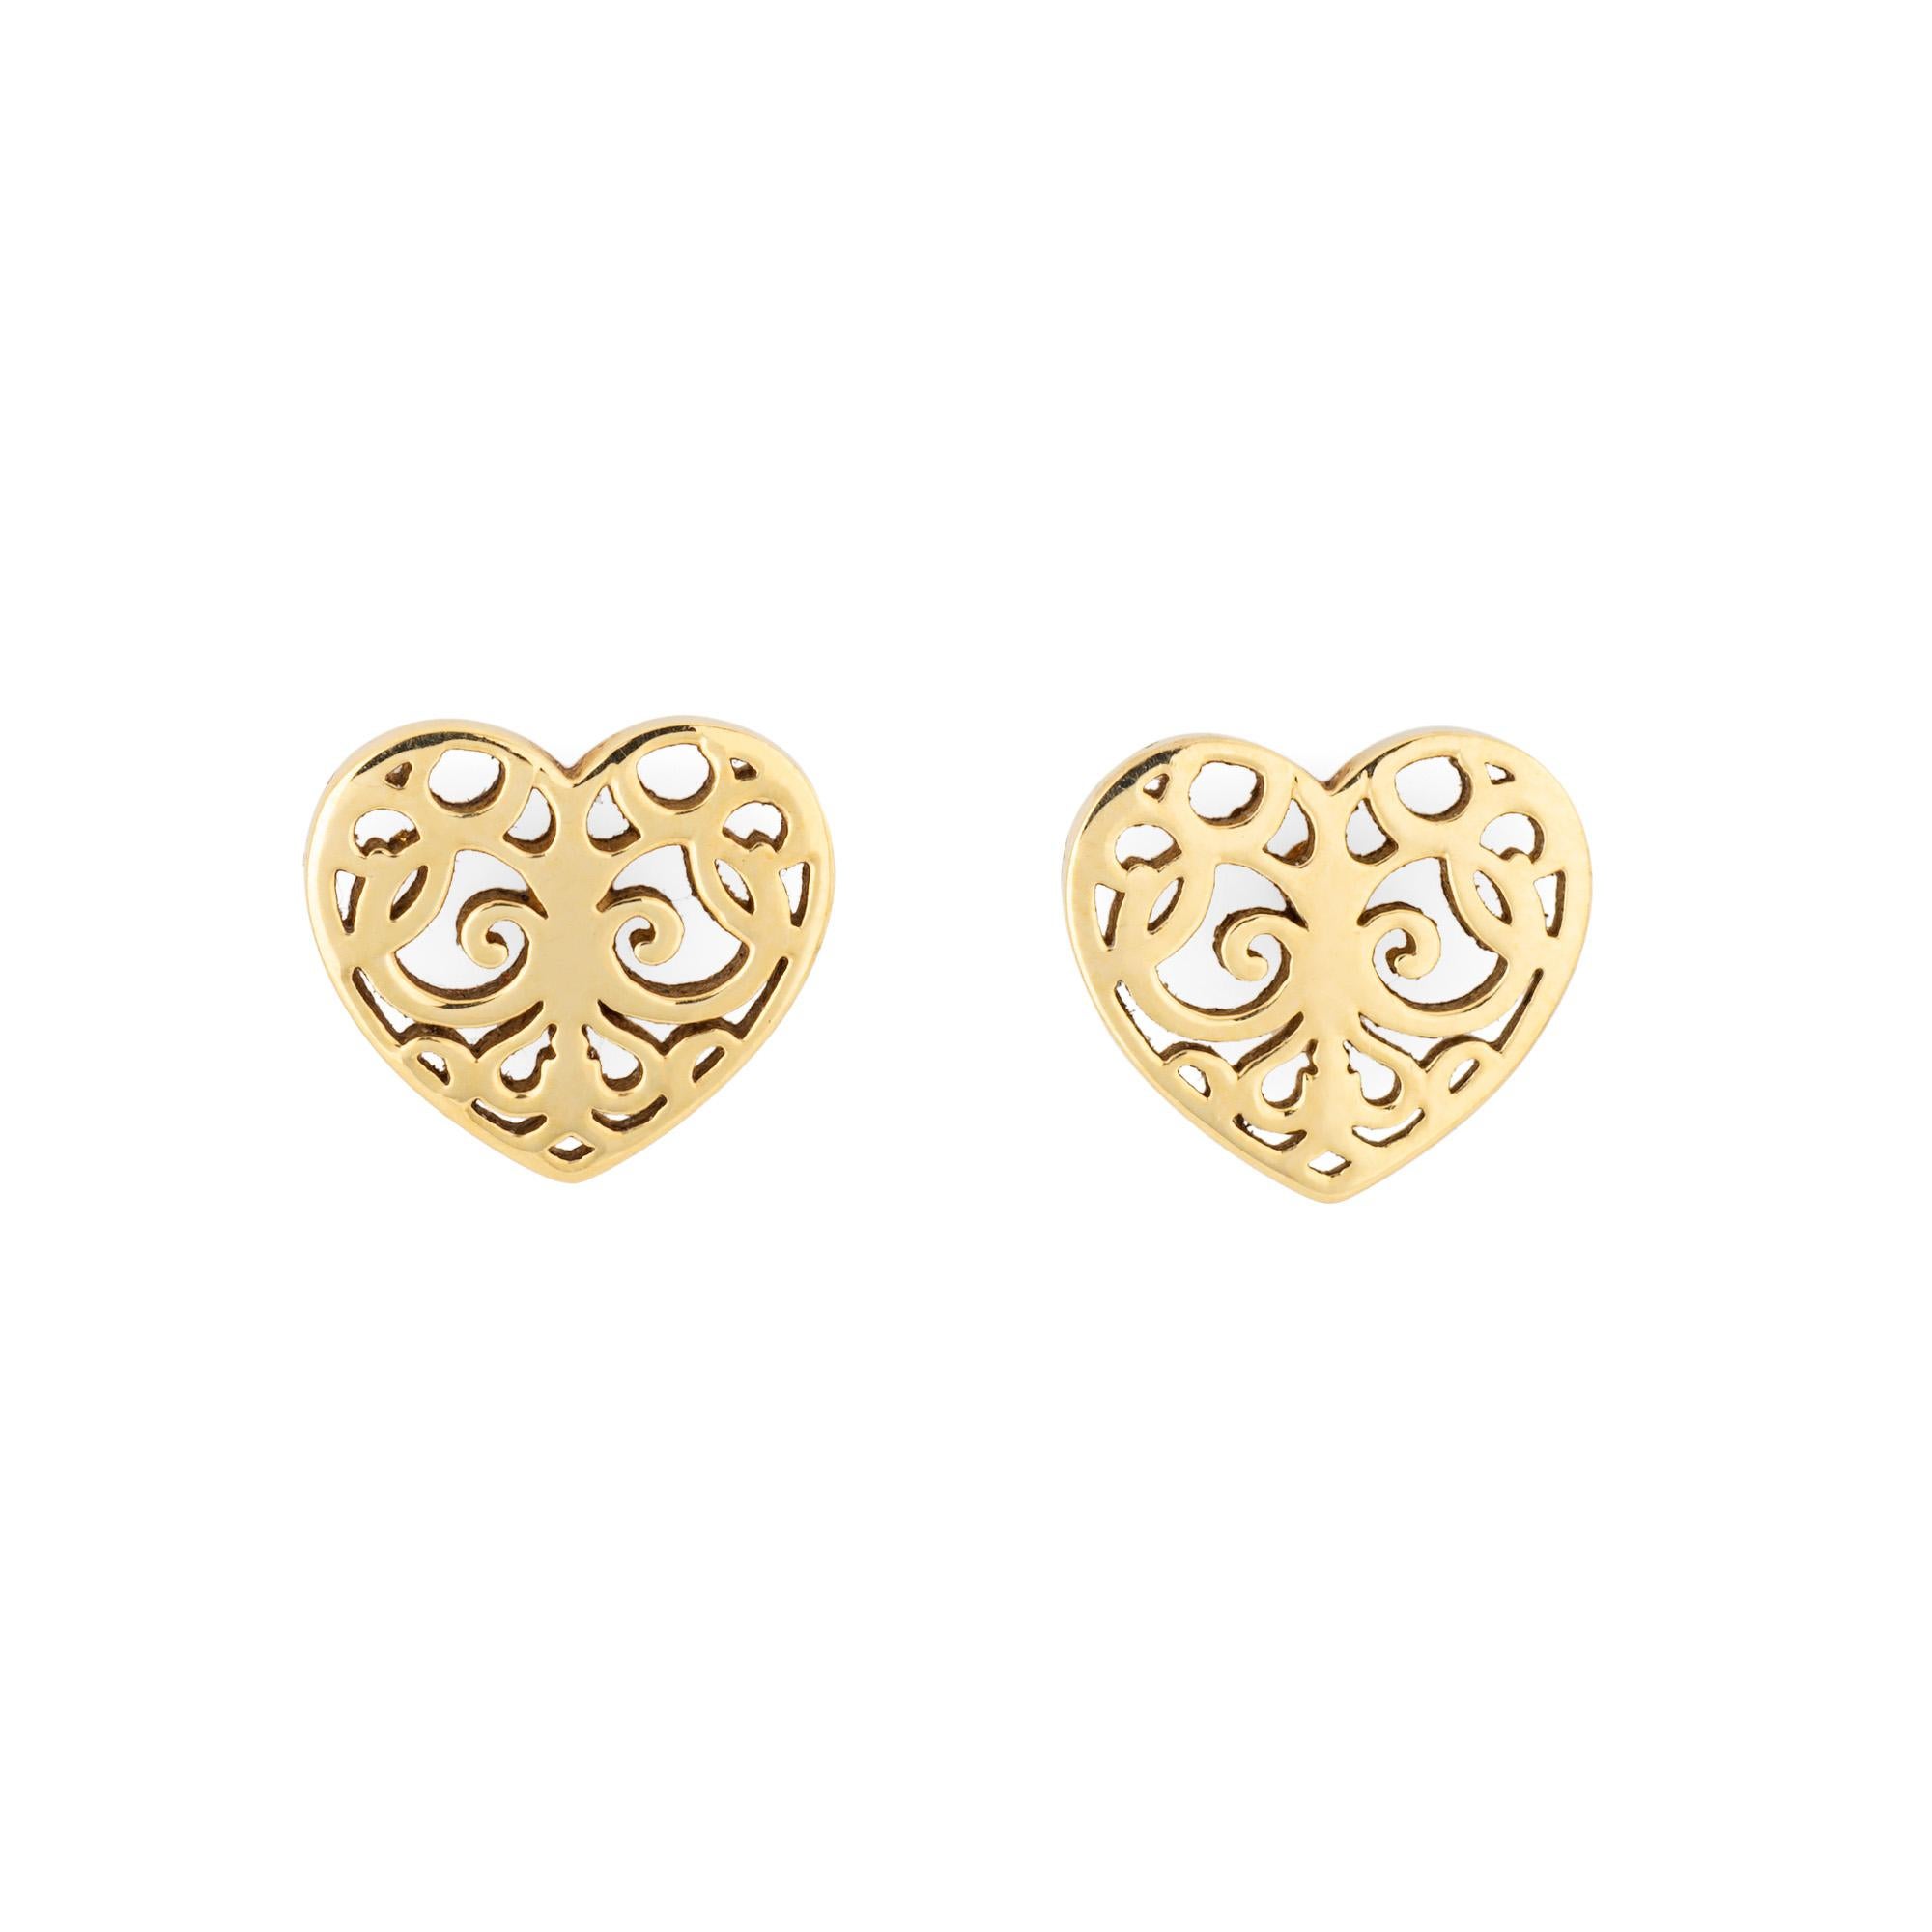 Estate Tiffany & Co Enchant Heart Earrings 18k Yellow Gold Studs Fine Jewelry  In Good Condition For Sale In Torrance, CA